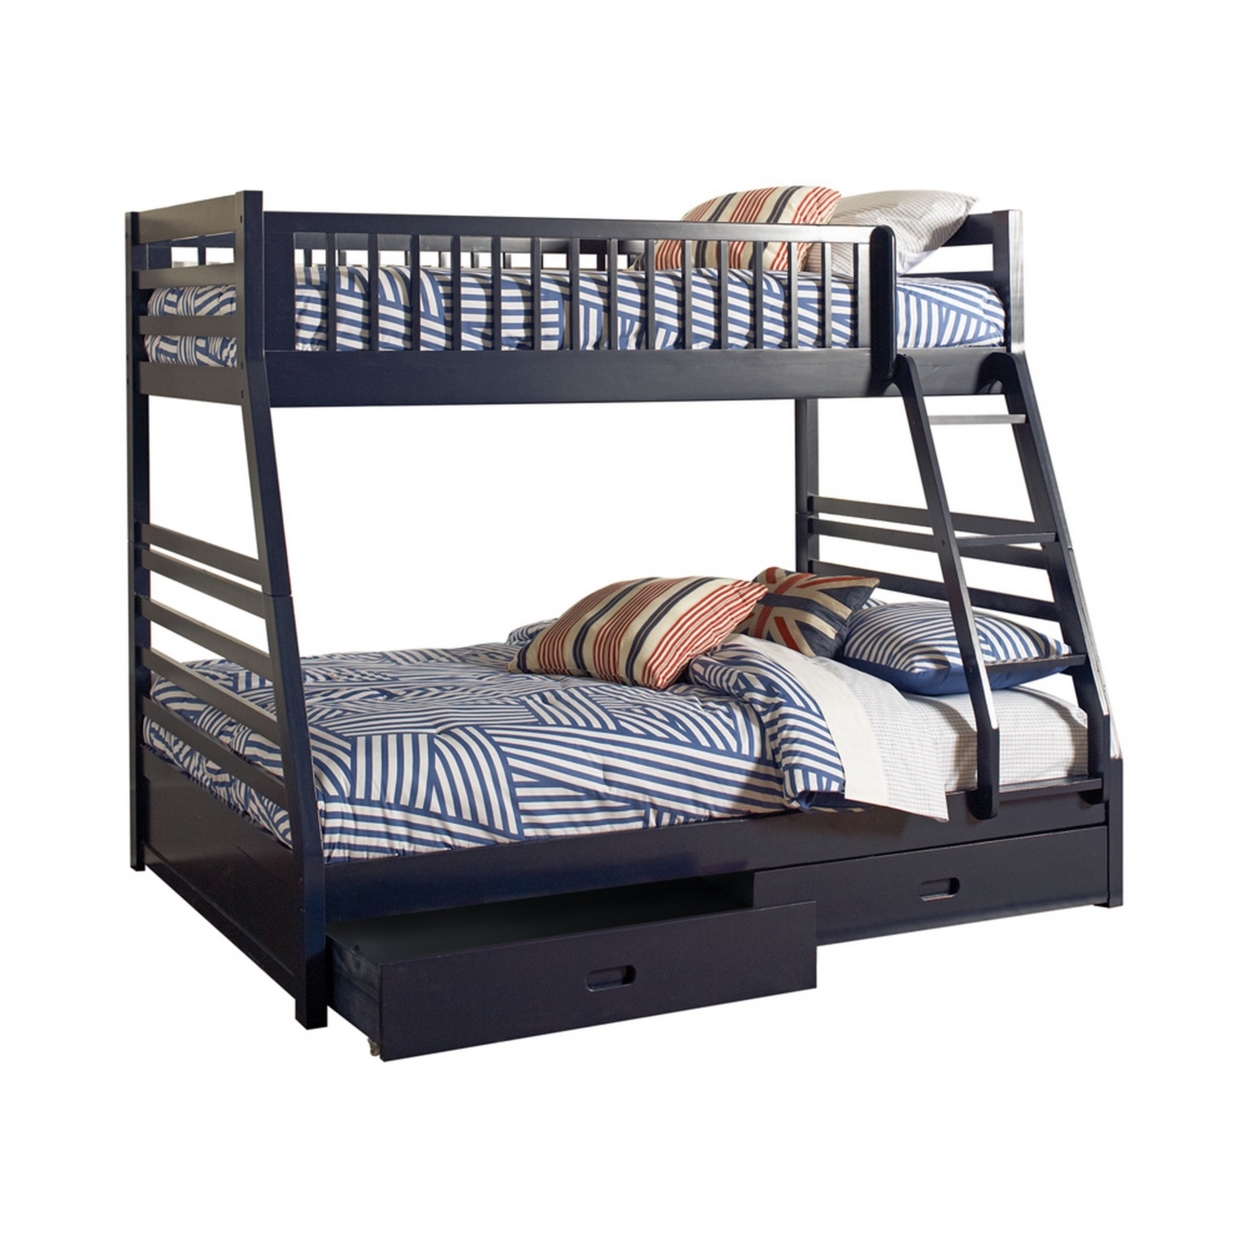 Wooden Twin Over Full Bunk Bed With Wheel Supported Bottom Drawers, Blue- Saltoro Sherpi